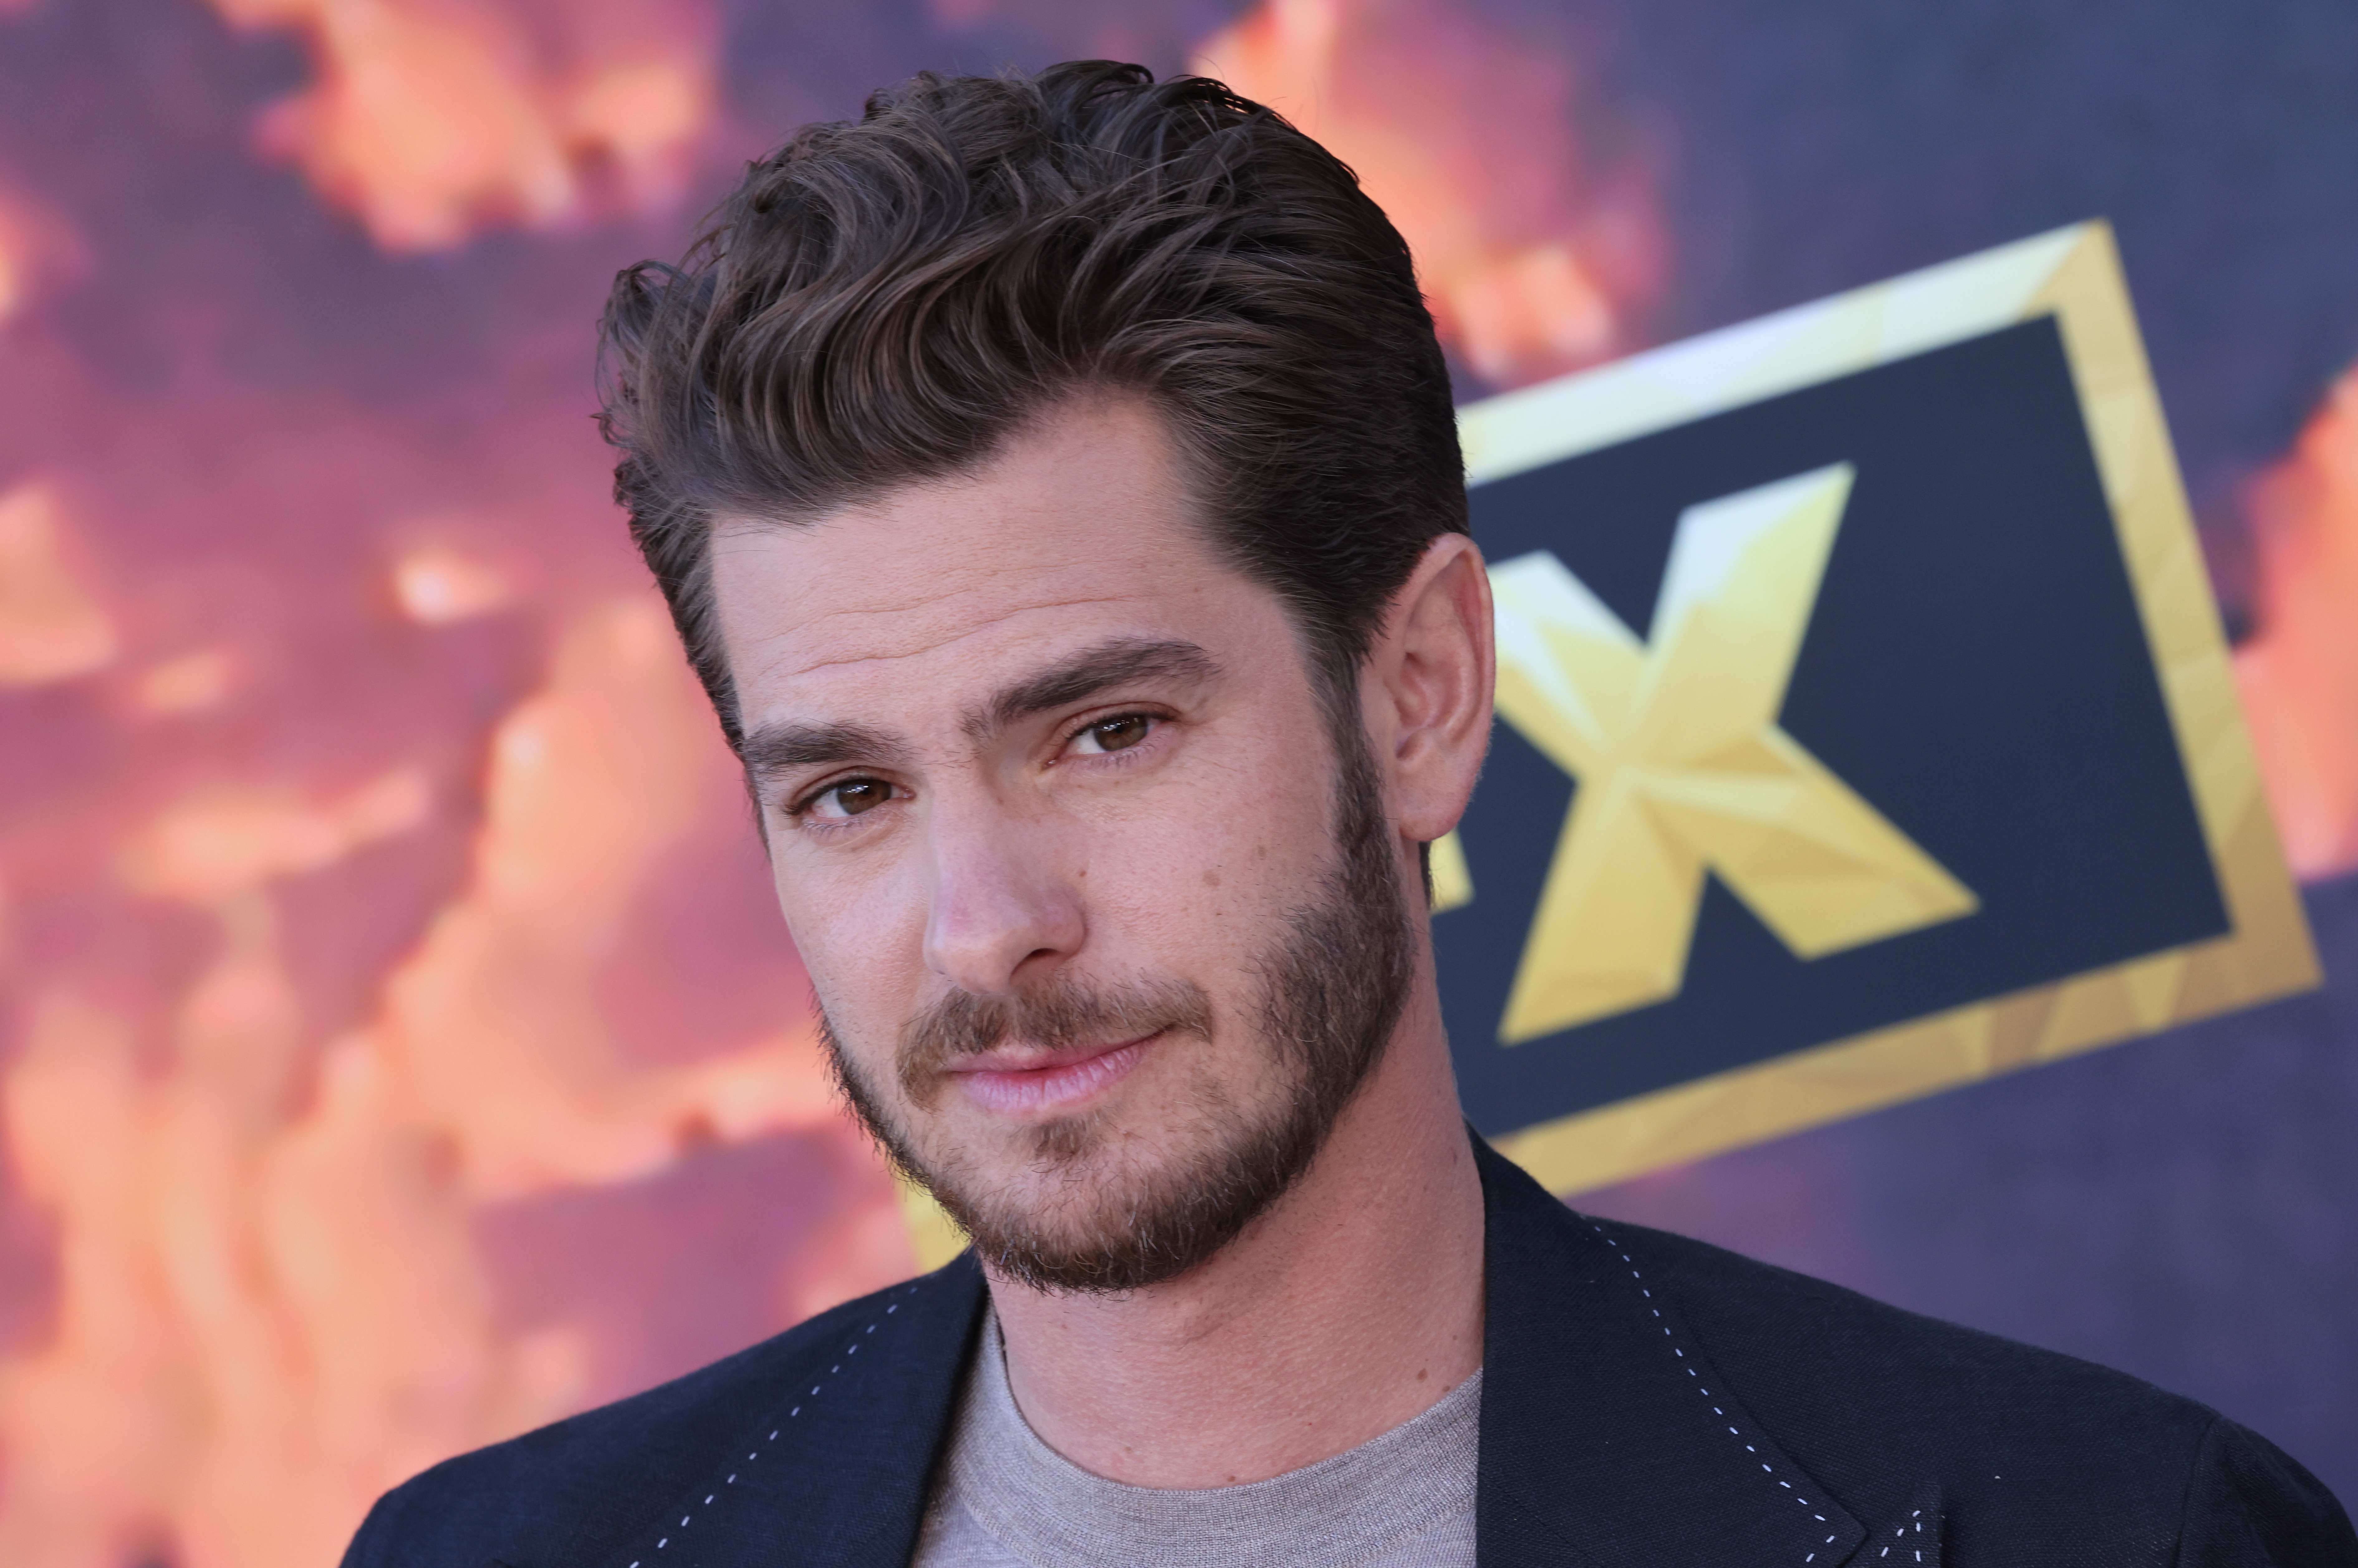 Andrew Garfield Age, Career, and Personal Life